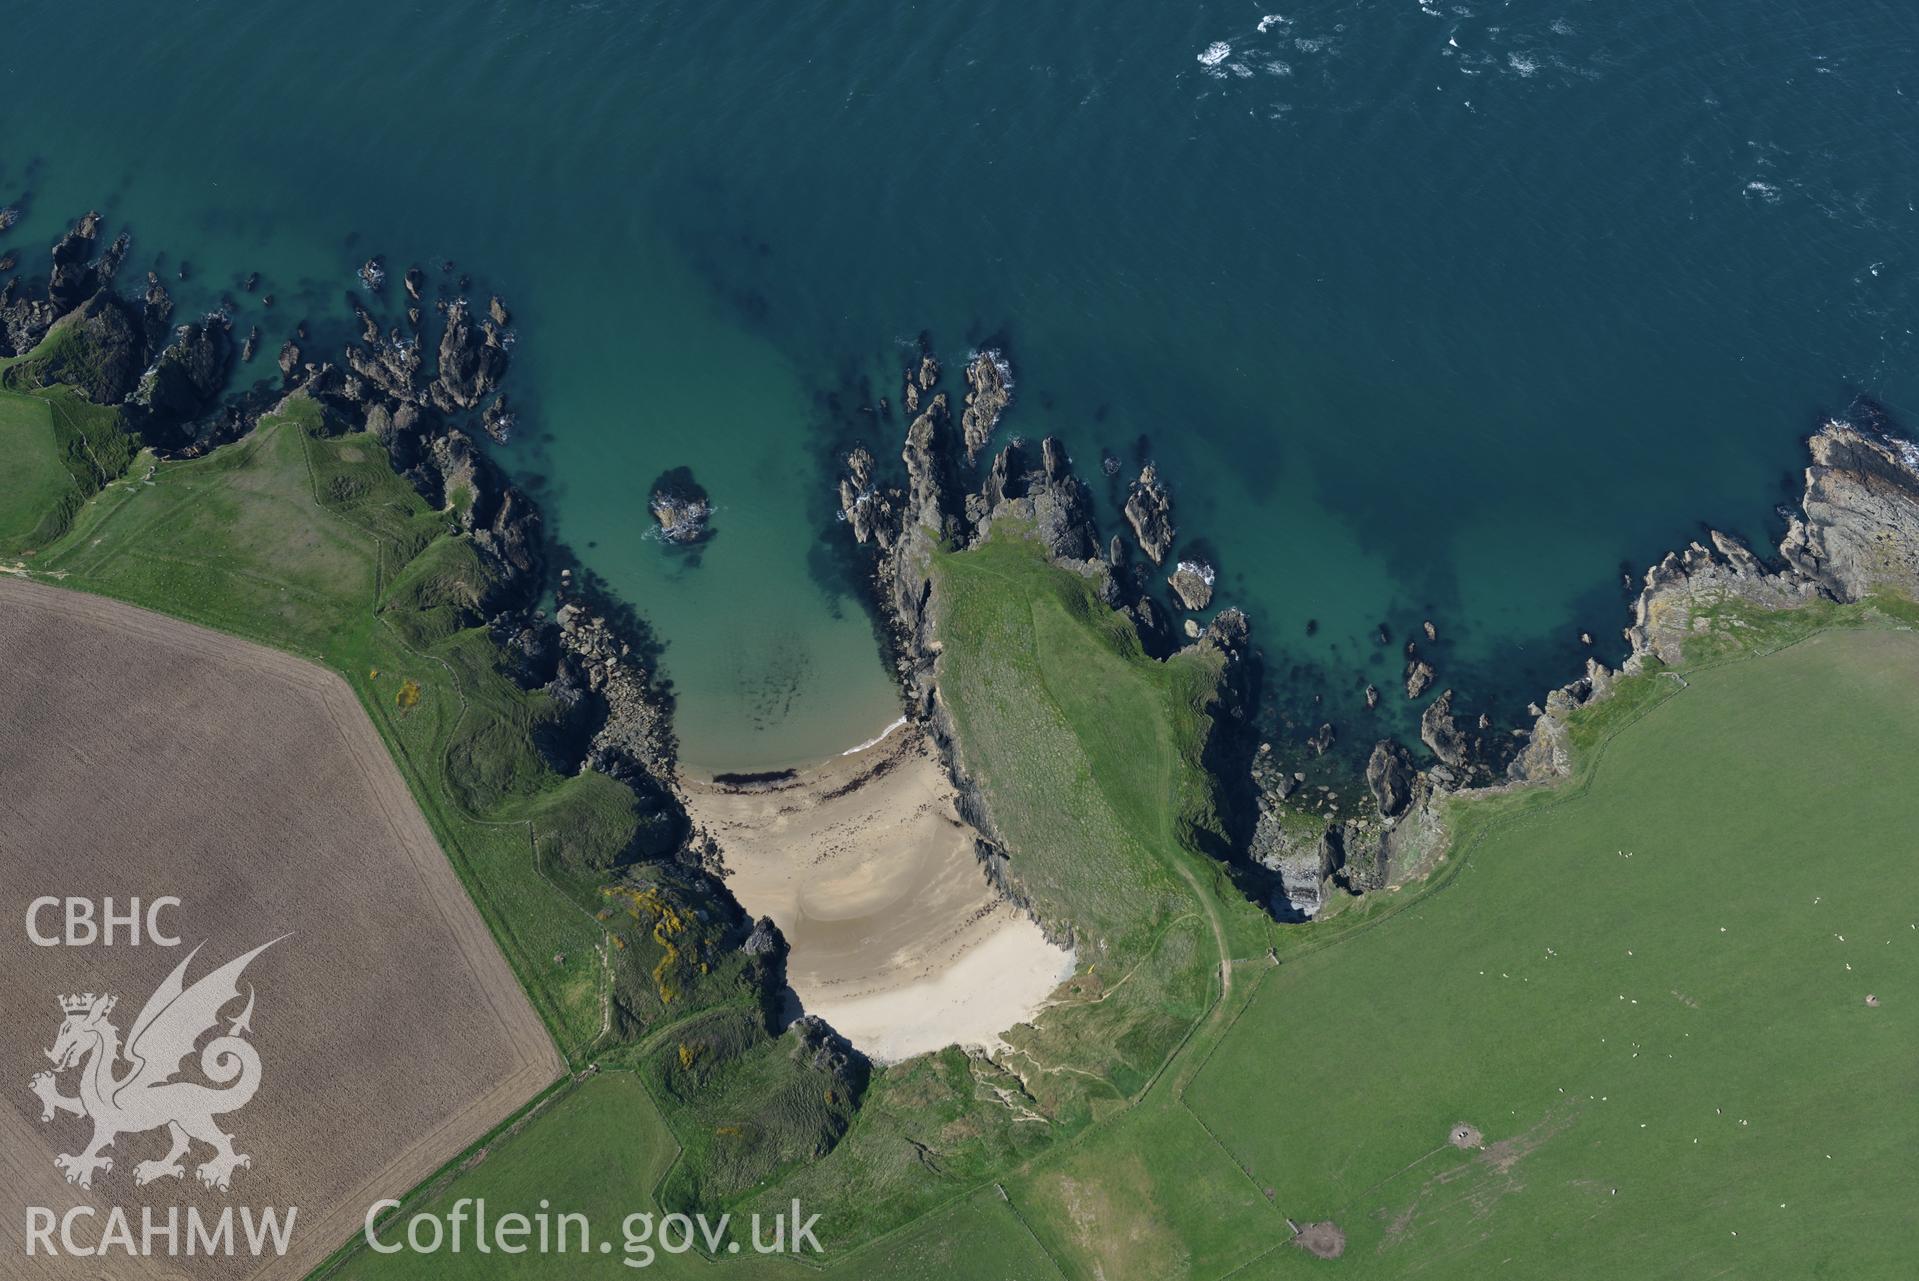 Aerial photography of Dinas promontory fort taken on 3rd May 2017.  Baseline aerial reconnaissance survey for the CHERISH Project. ? Crown: CHERISH PROJECT 2017. Produced with EU funds through the Ireland Wales Co-operation Programme 2014-2020. All material made freely available through the Open Government Licence.